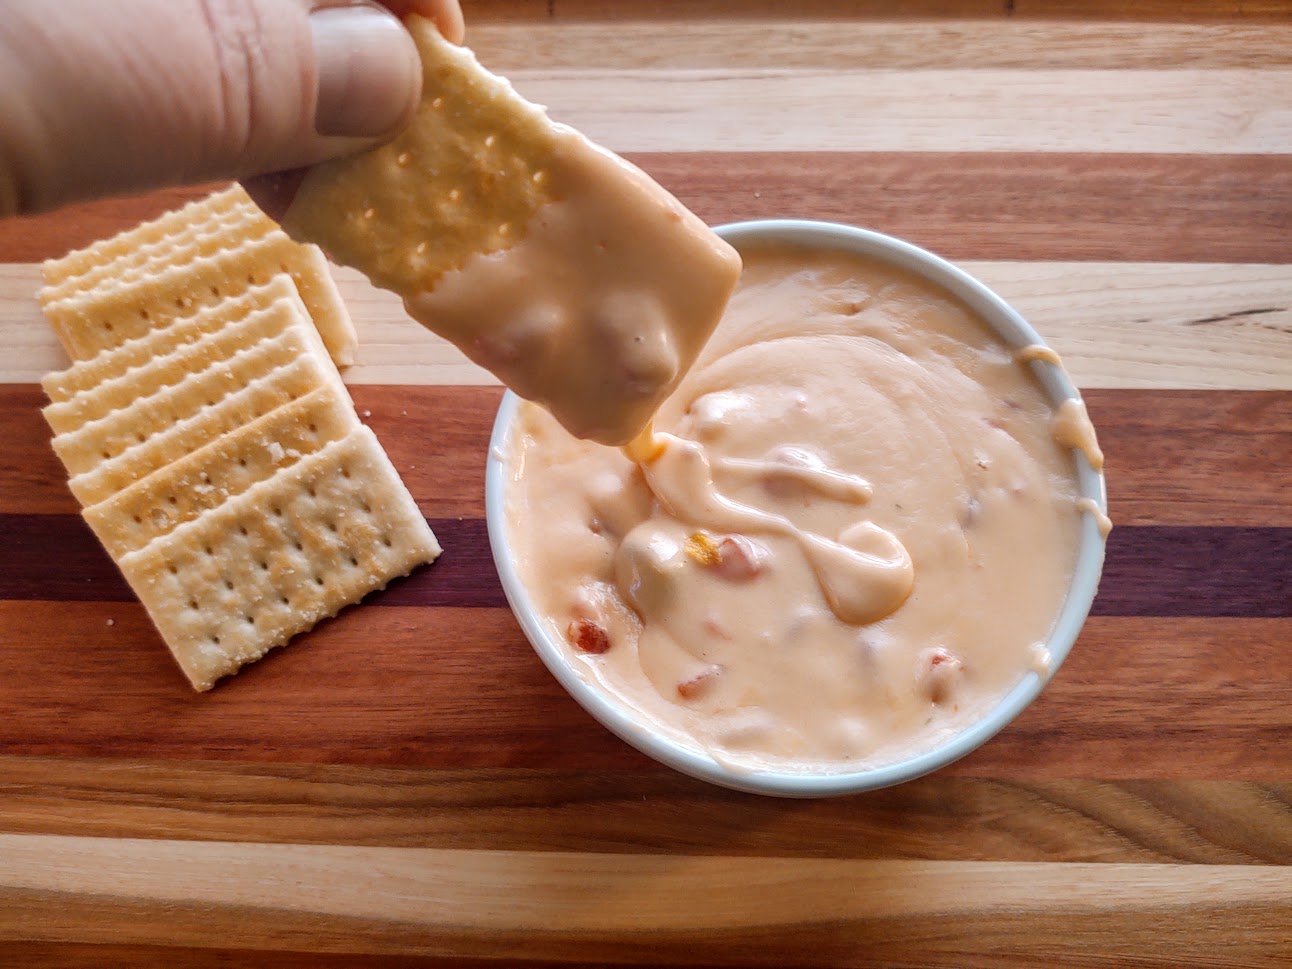 a cracker being dipped into 3 ingredient cheese dip